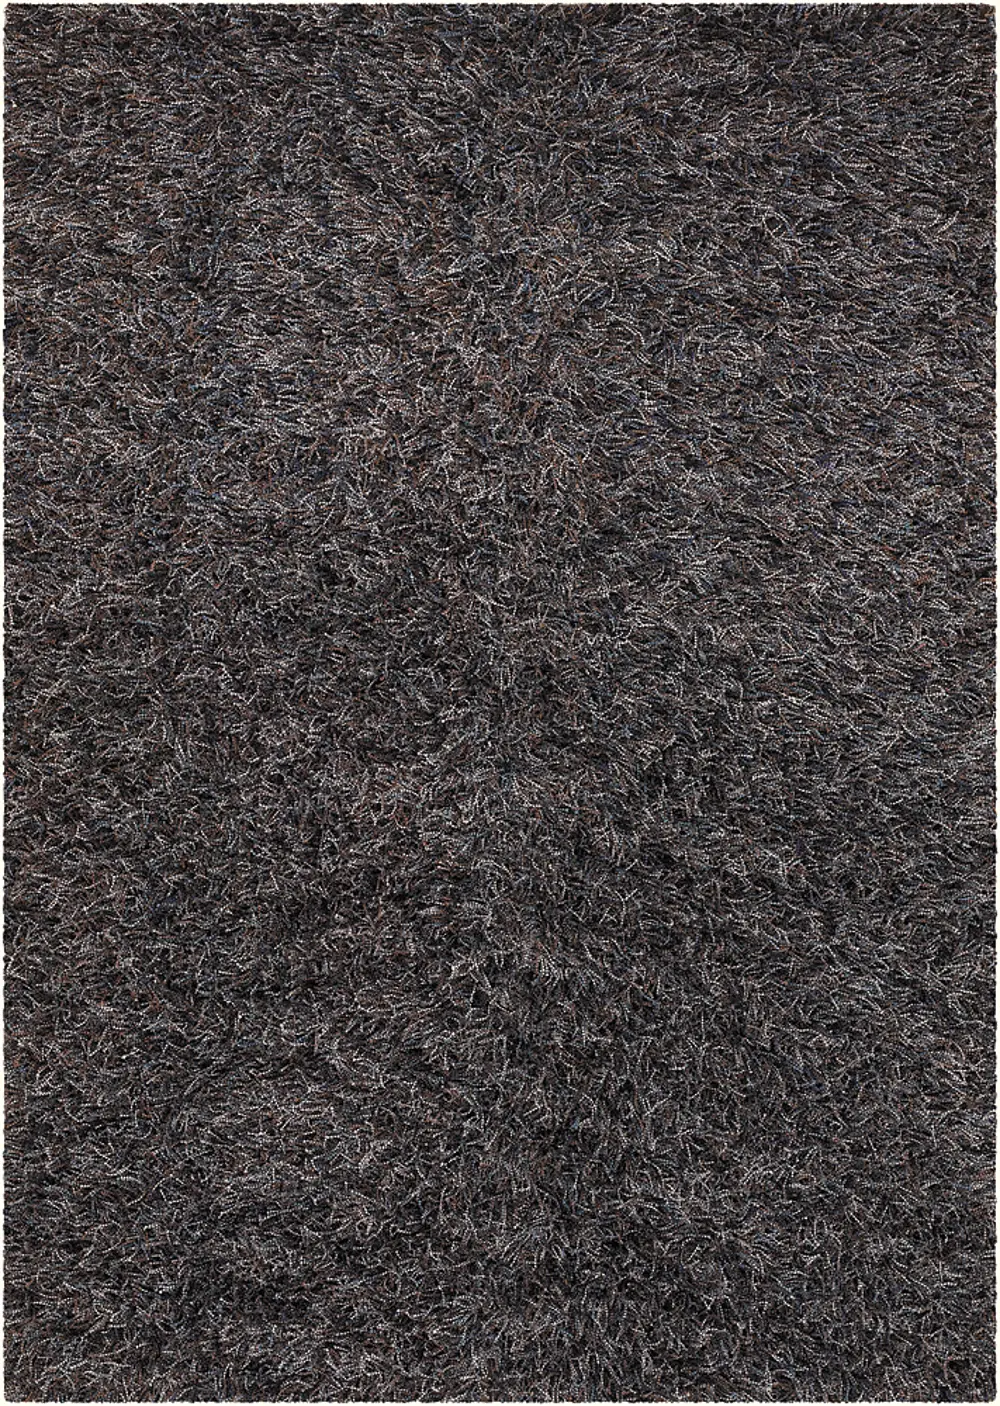 8 x 11 Large Contemporary Brown Area Rug -  Astrid-1